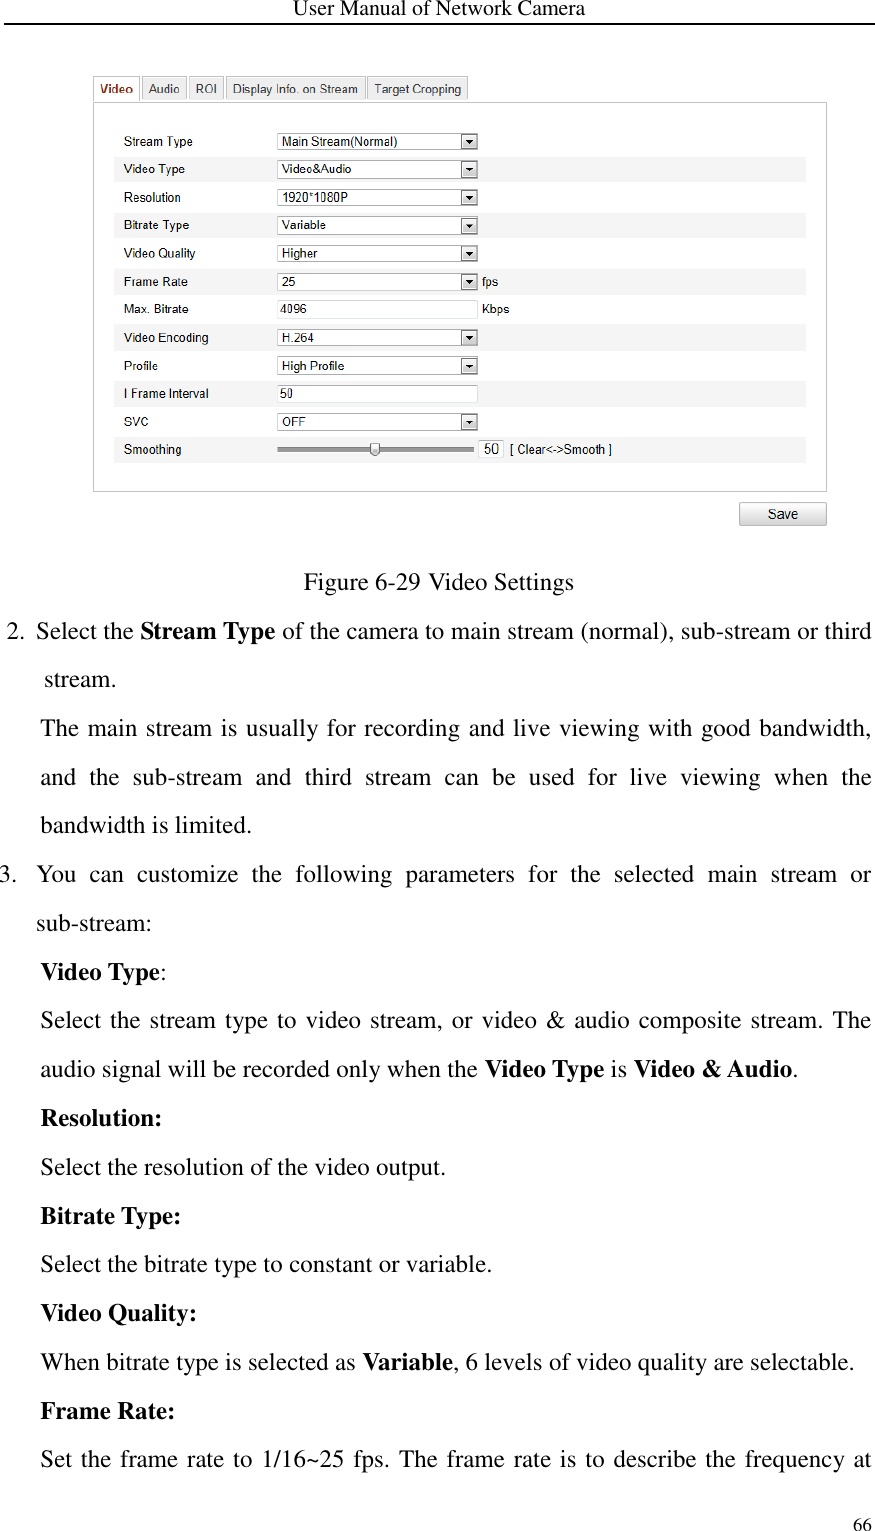 User Manual of Network Camera 66   Figure 6-29 Video Settings 2. Select the Stream Type of the camera to main stream (normal), sub-stream or third stream. The main stream is usually for recording and live viewing with good bandwidth, and  the  sub-stream  and  third  stream  can  be  used  for  live  viewing  when  the bandwidth is limited.   3. You  can  customize  the  following  parameters  for  the  selected  main  stream  or sub-stream:   Video Type:   Select the stream type to video stream, or video &amp; audio composite stream. The audio signal will be recorded only when the Video Type is Video &amp; Audio. Resolution:   Select the resolution of the video output. Bitrate Type:   Select the bitrate type to constant or variable.   Video Quality:   When bitrate type is selected as Variable, 6 levels of video quality are selectable. Frame Rate:   Set the frame rate to 1/16~25 fps. The frame rate is to describe the frequency at 